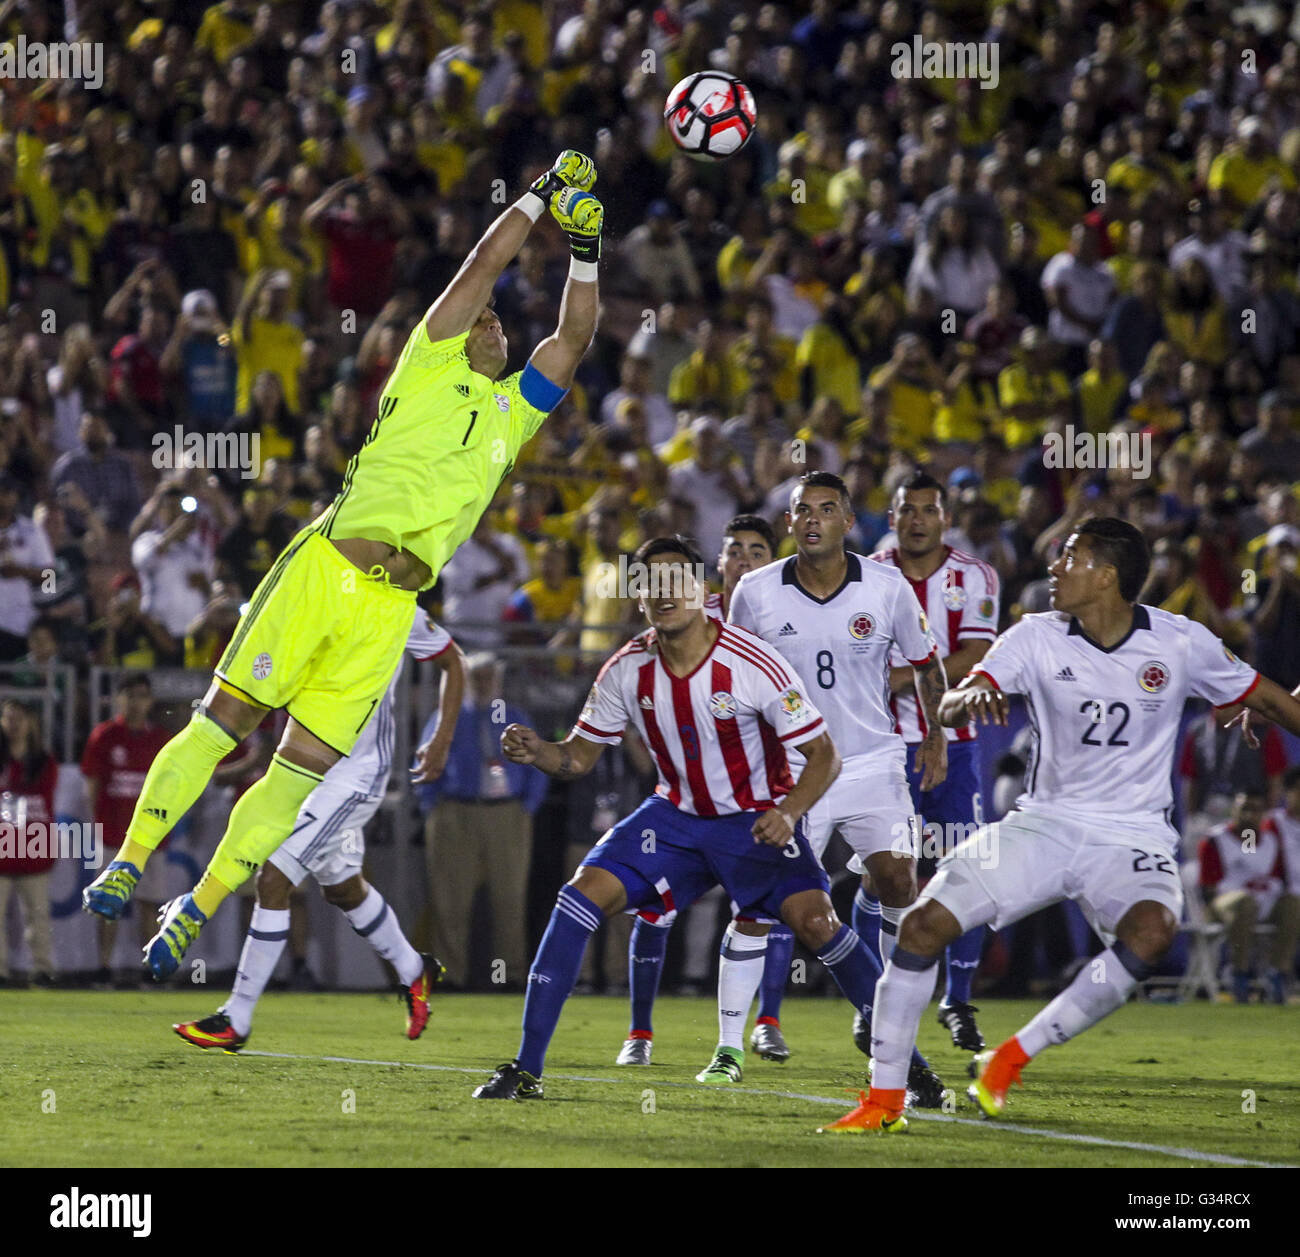 Los Angeles, California, USA. 7th June, 2016. Colombia goalkeeper David Ospina, left, makes a save during the Copa America soccer match against Paraguay at Rose Bowl in Pasadena, California, June 7, 2016. Colombia won 2-1. © Ringo Chiu/ZUMA Wire/Alamy Live News Stock Photo